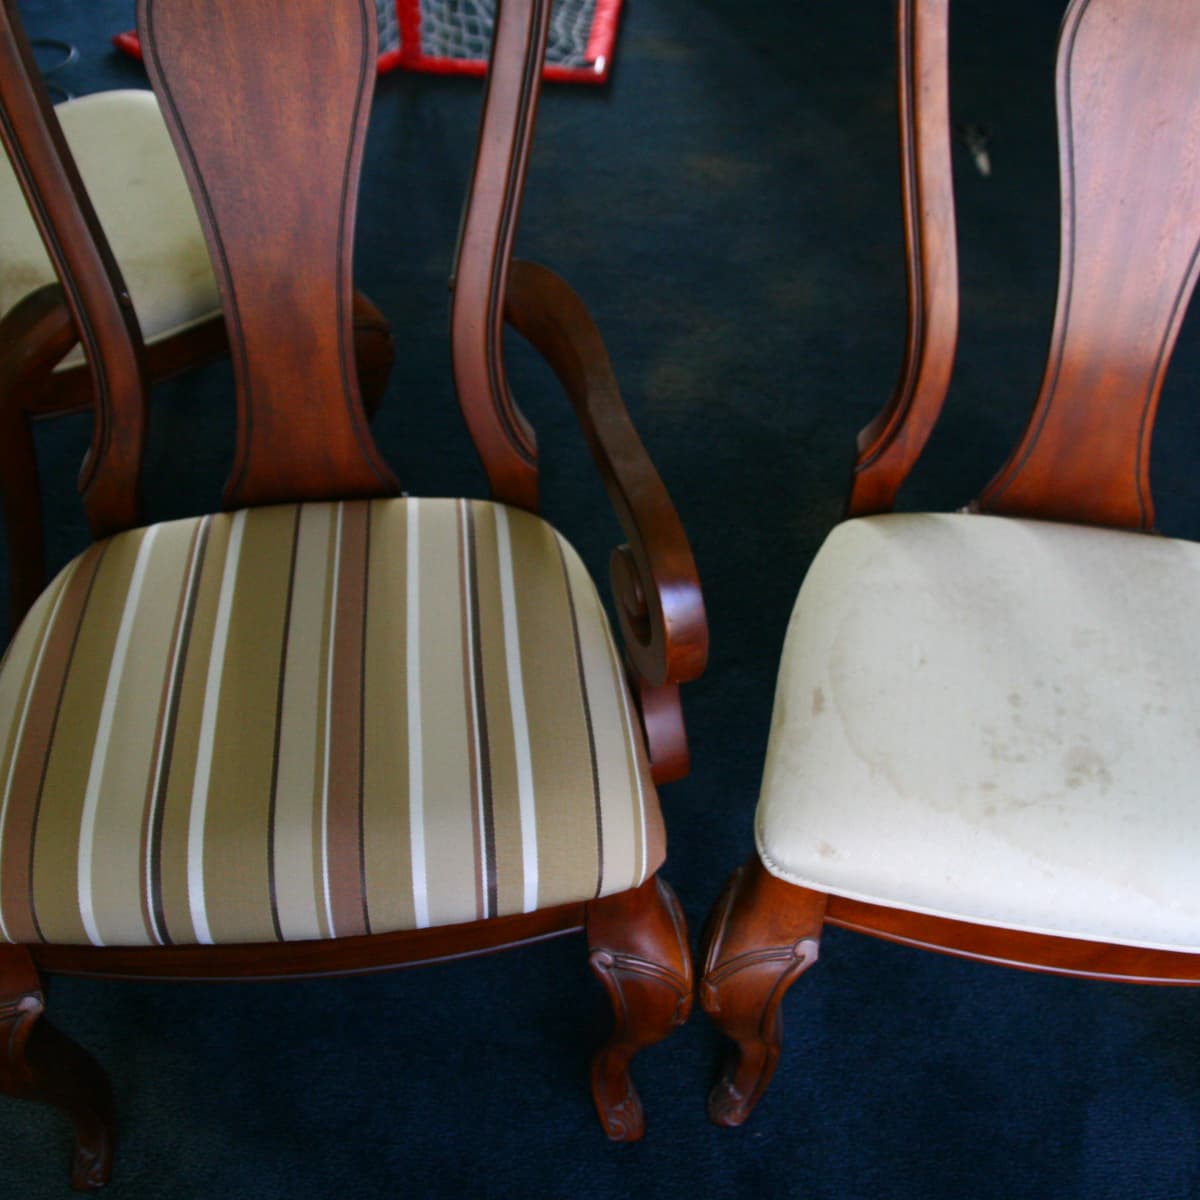 How To Reupholster A Dining Room Chair, How To Reupholster A Leather Dining Chair With Fabric